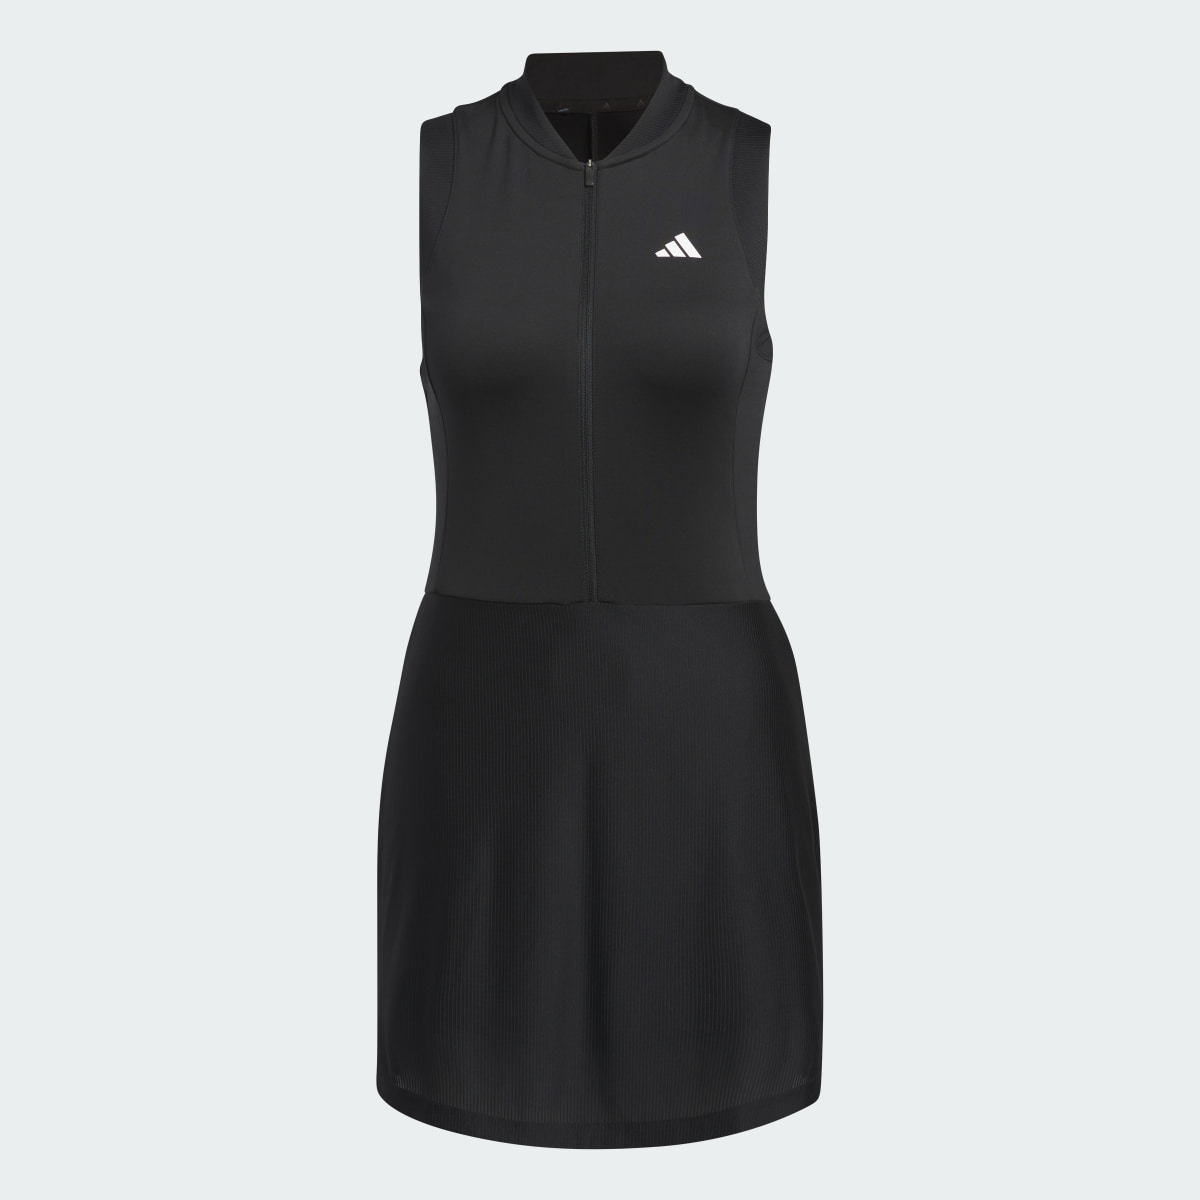 Adidas Robe sans manches Ultimate365 Femmes. 6